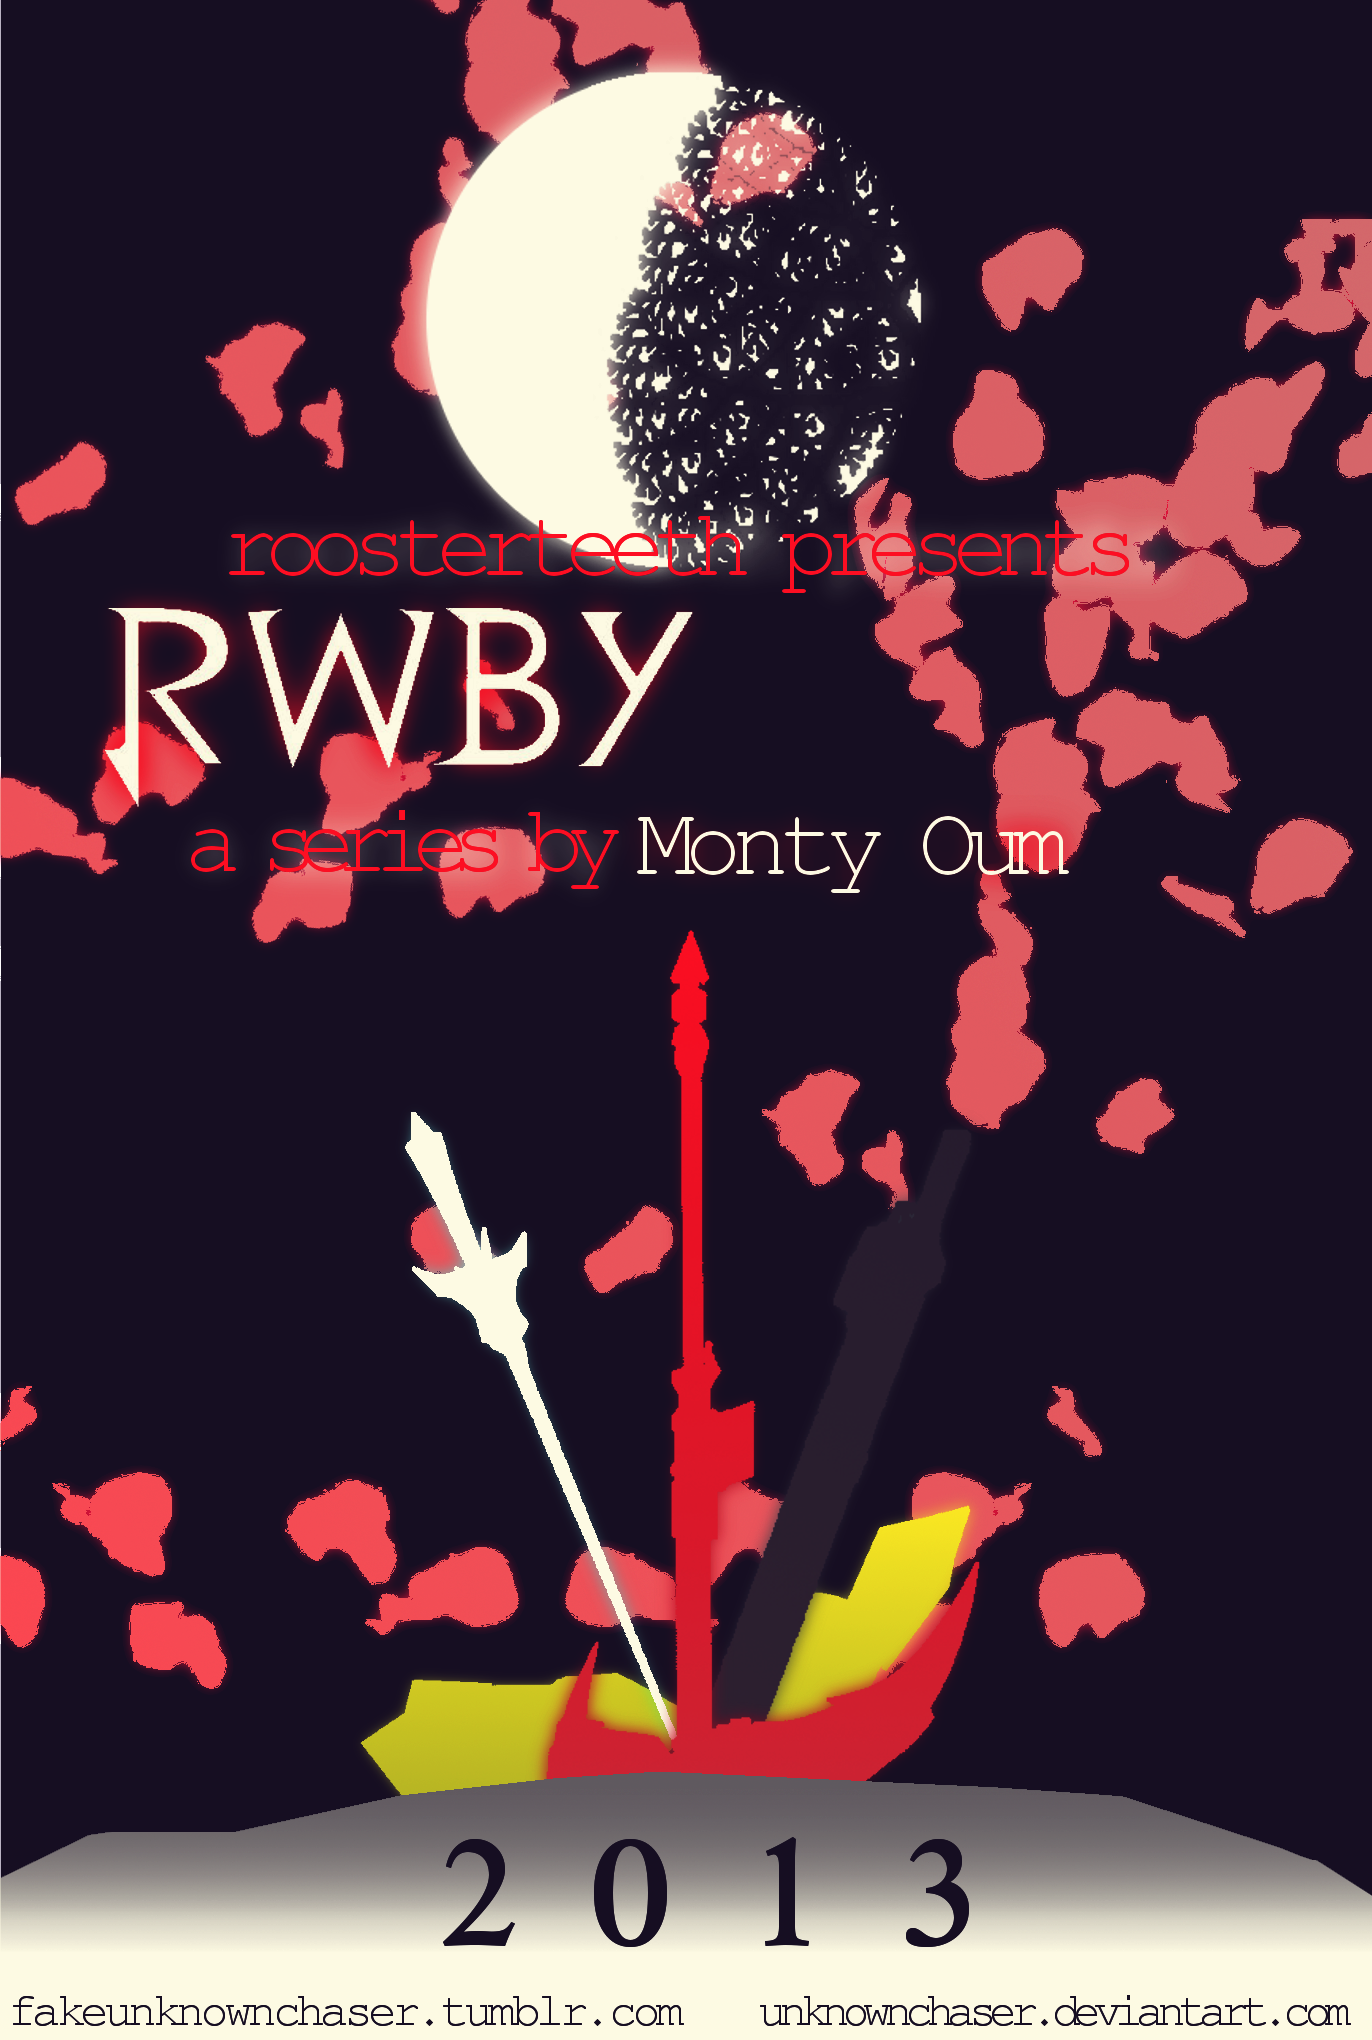 rwby_poster_design_by_unknownchaser-d6enlzi.png